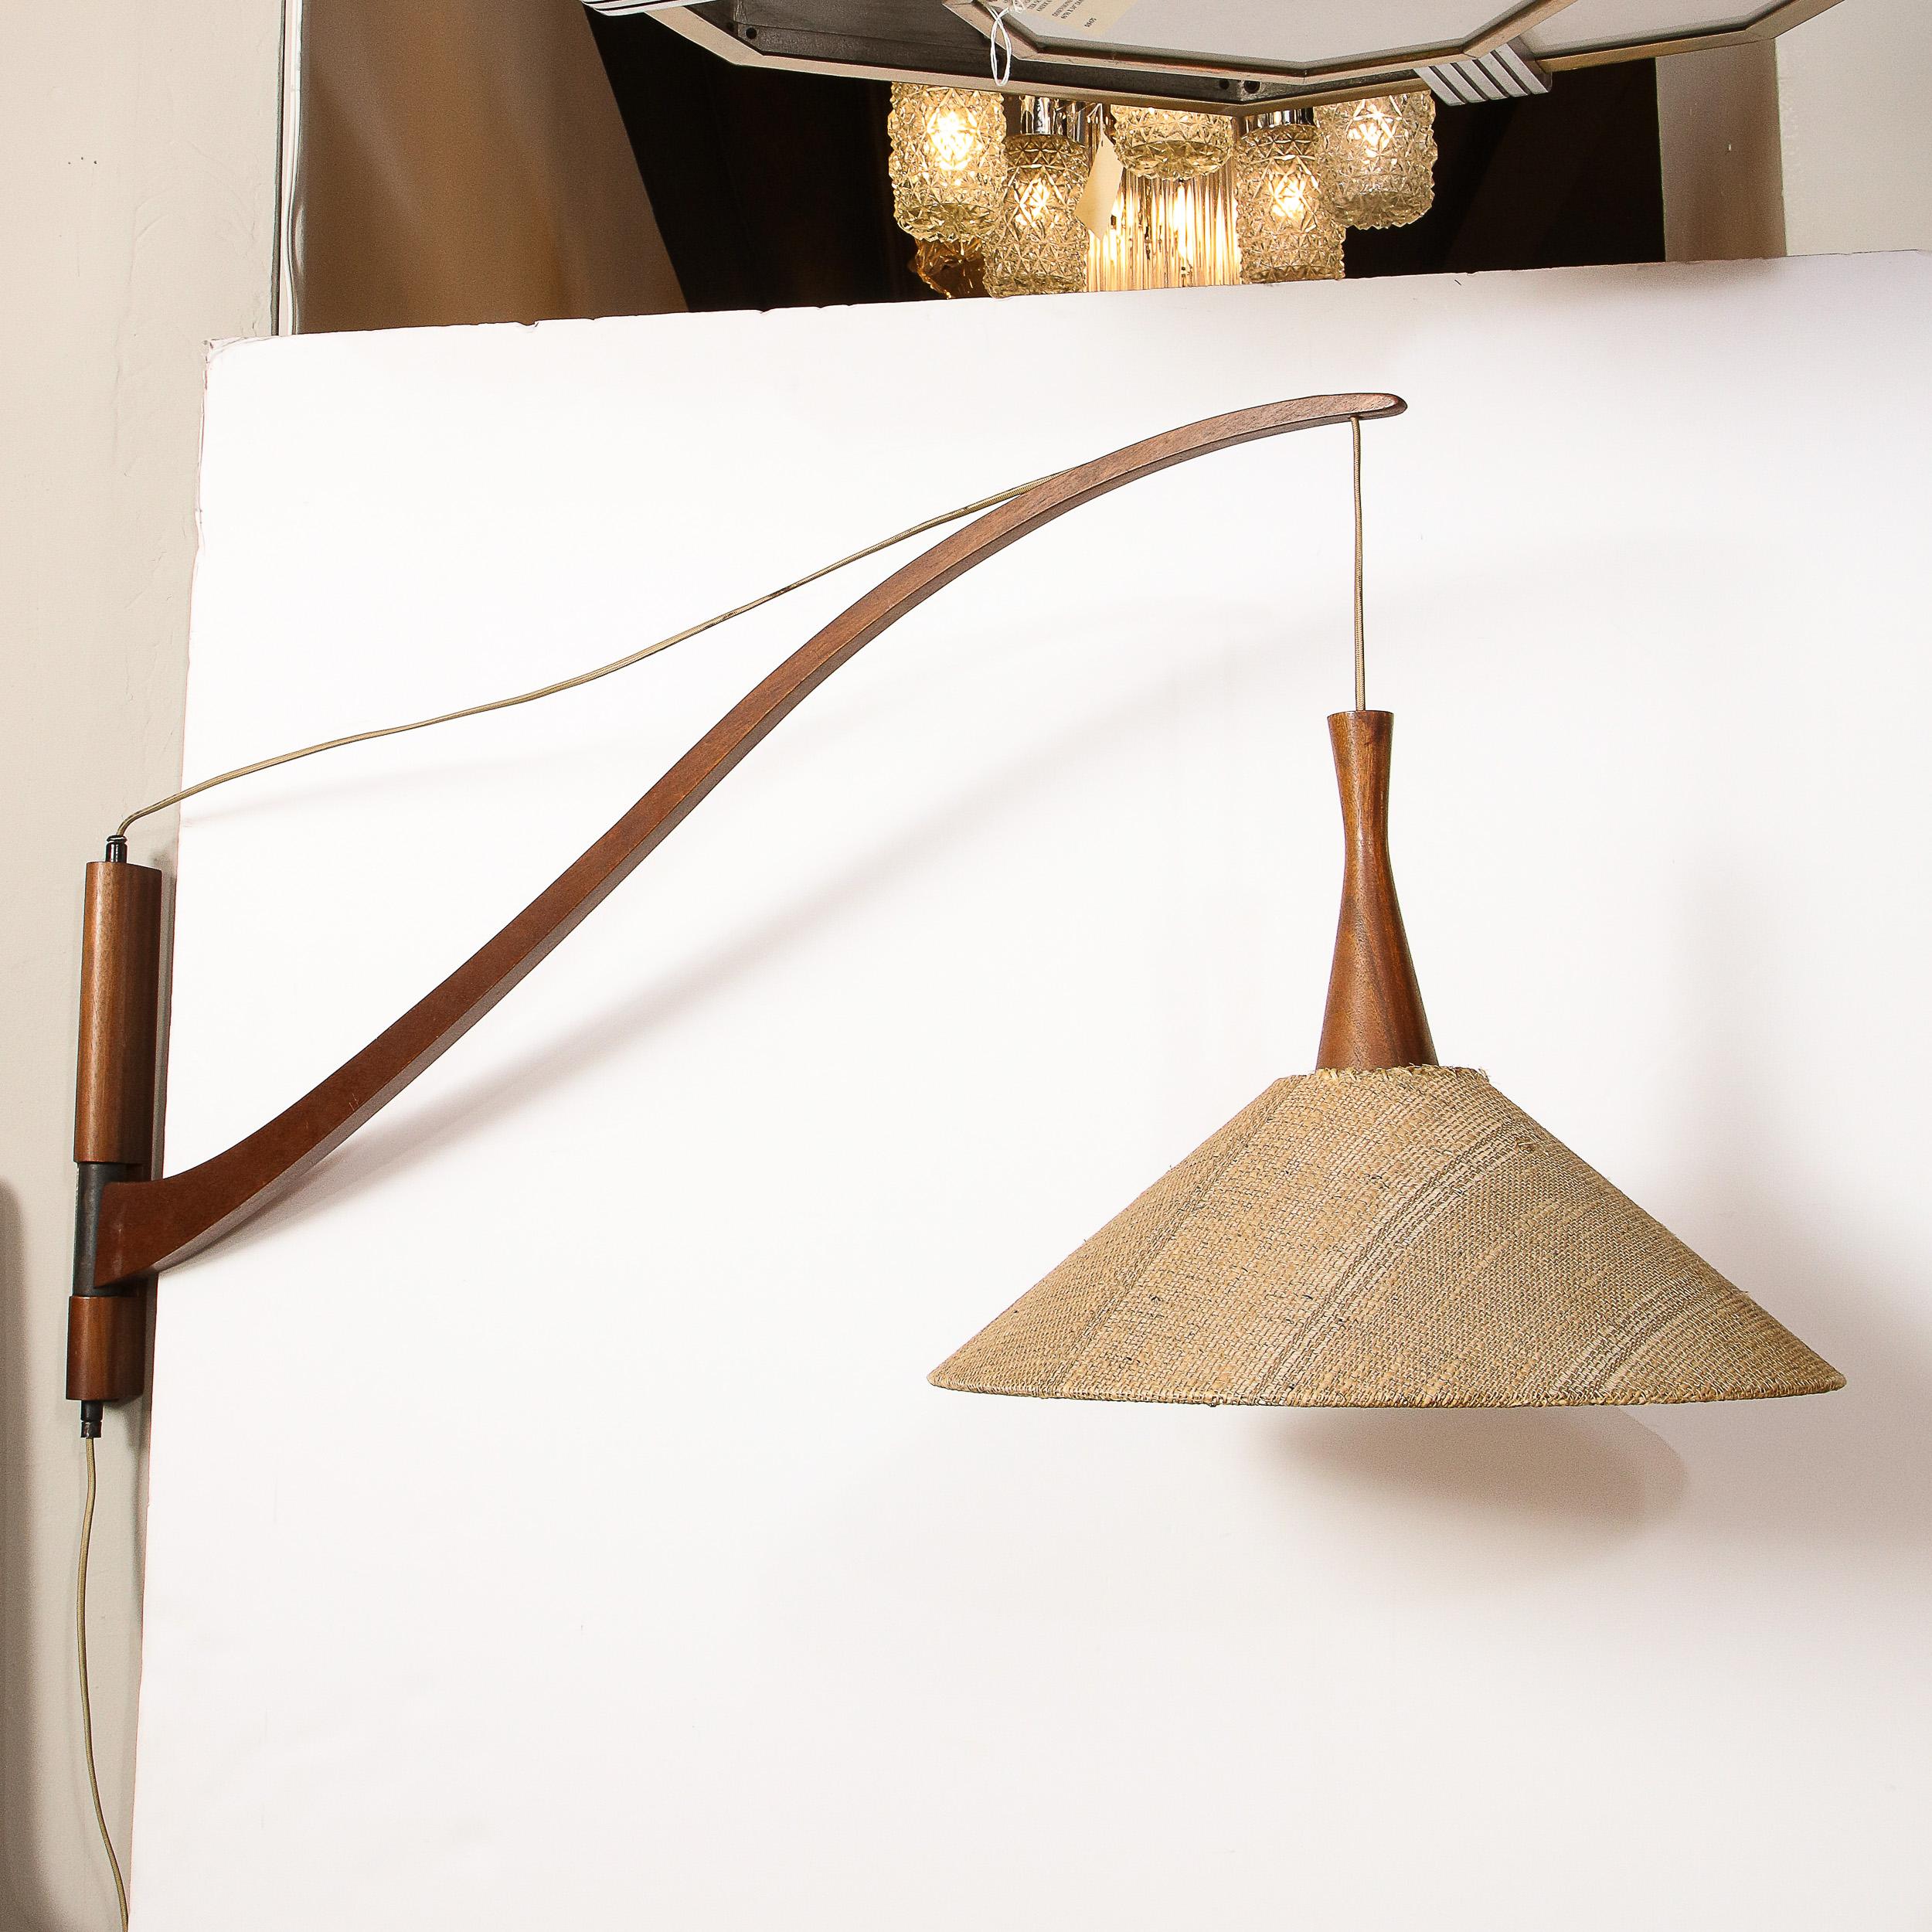 Mid-20th Century French Mid-Century Modern Handrubbed Teak Swing-Arm Wall Sconce w/ Hessin Shade